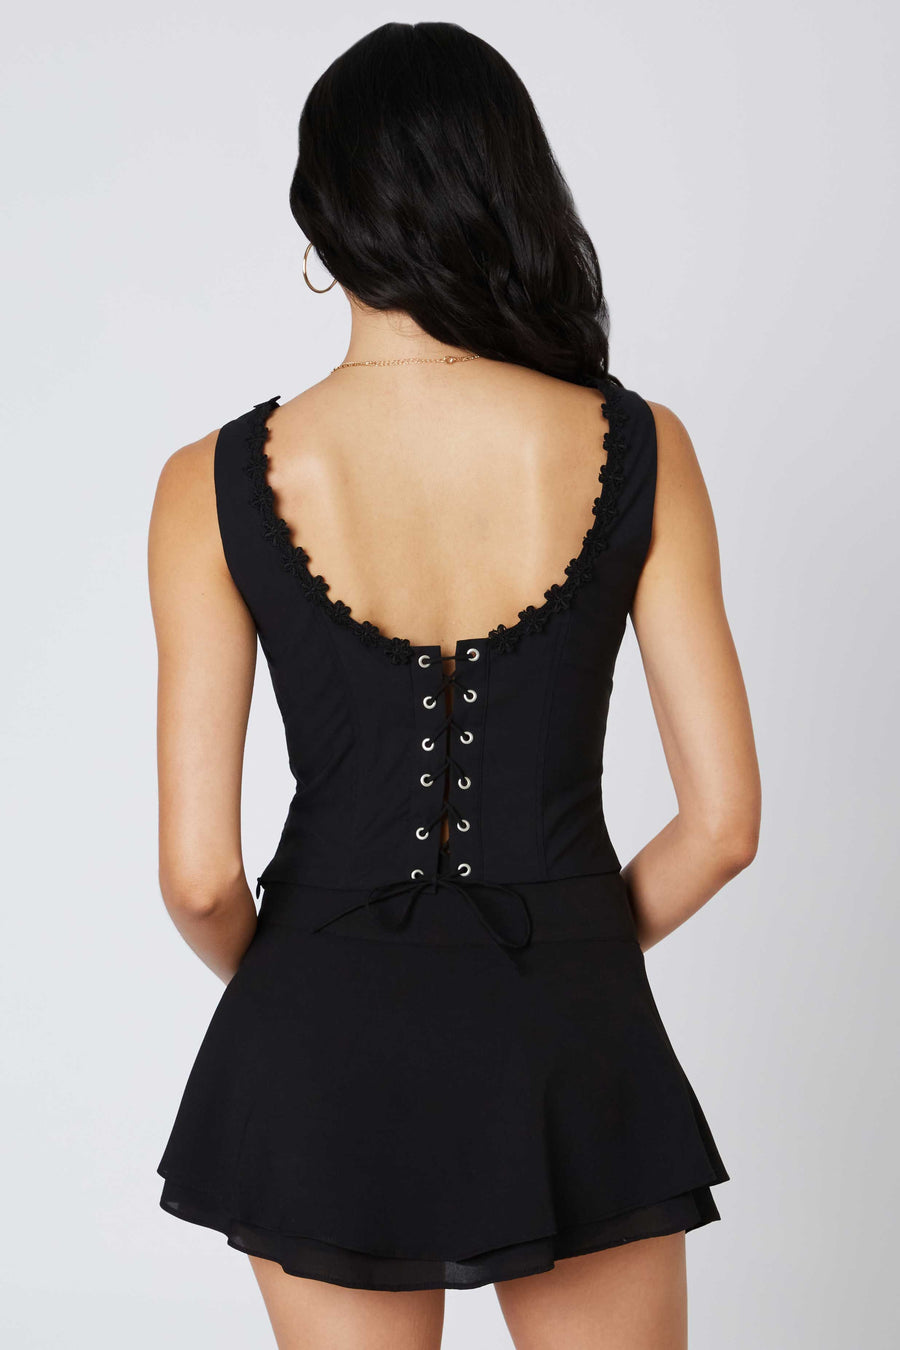 Cropped, lace-up top with thick straps and flower details along the neckline.